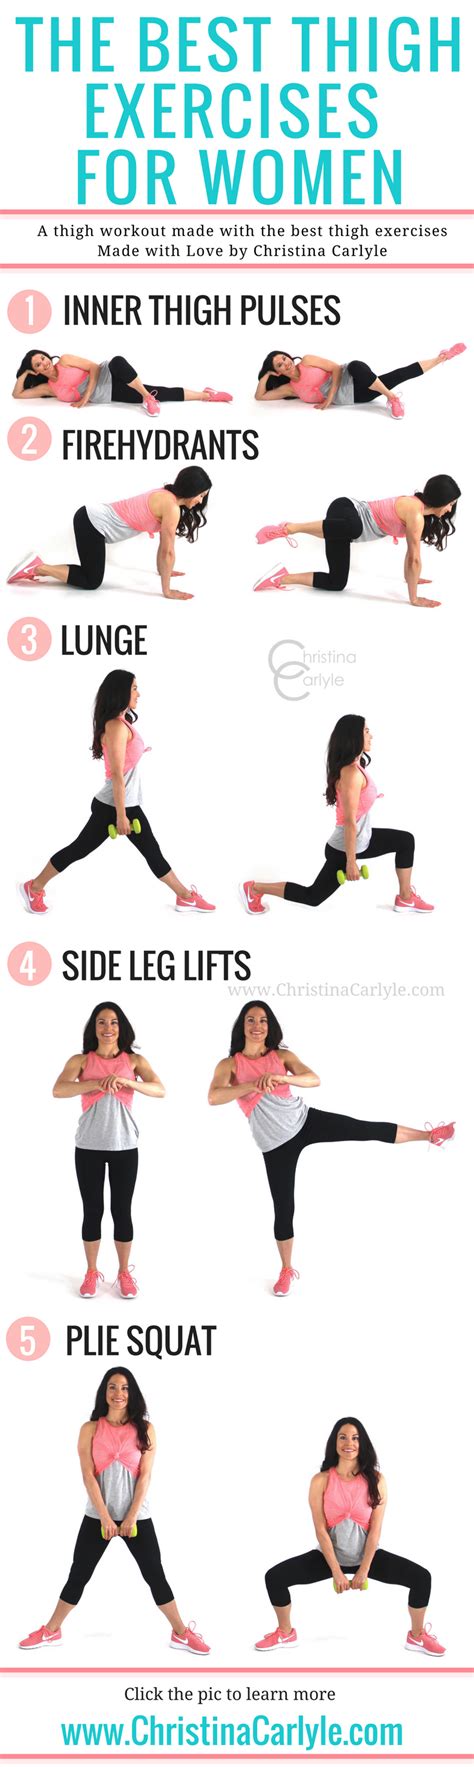 These Thigh Exercises Are Great For Toning The Inner And Outer Thighs